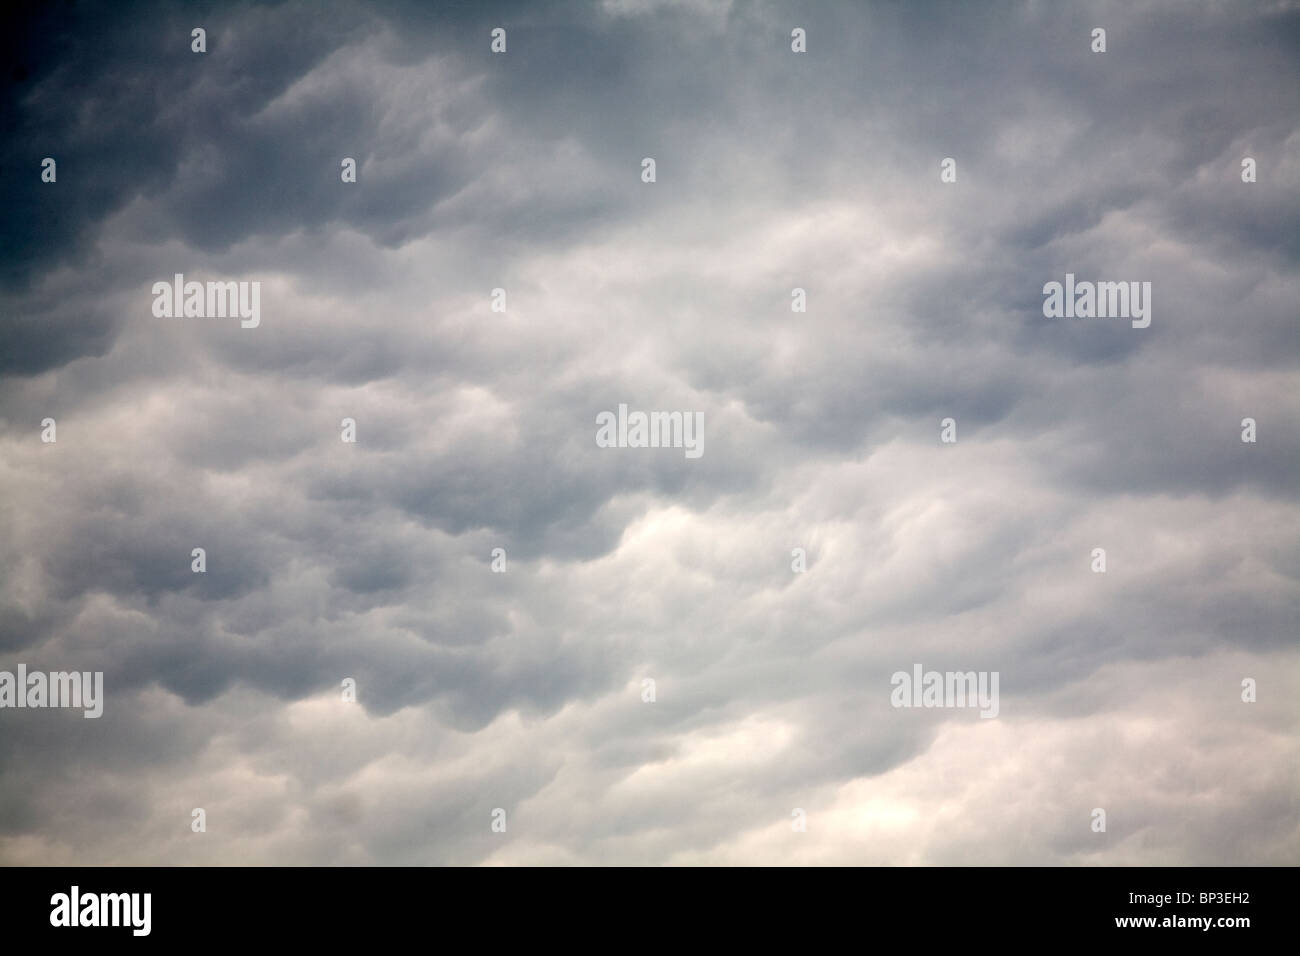 Undulating disturbed storm clouds storm approach Stock Photo